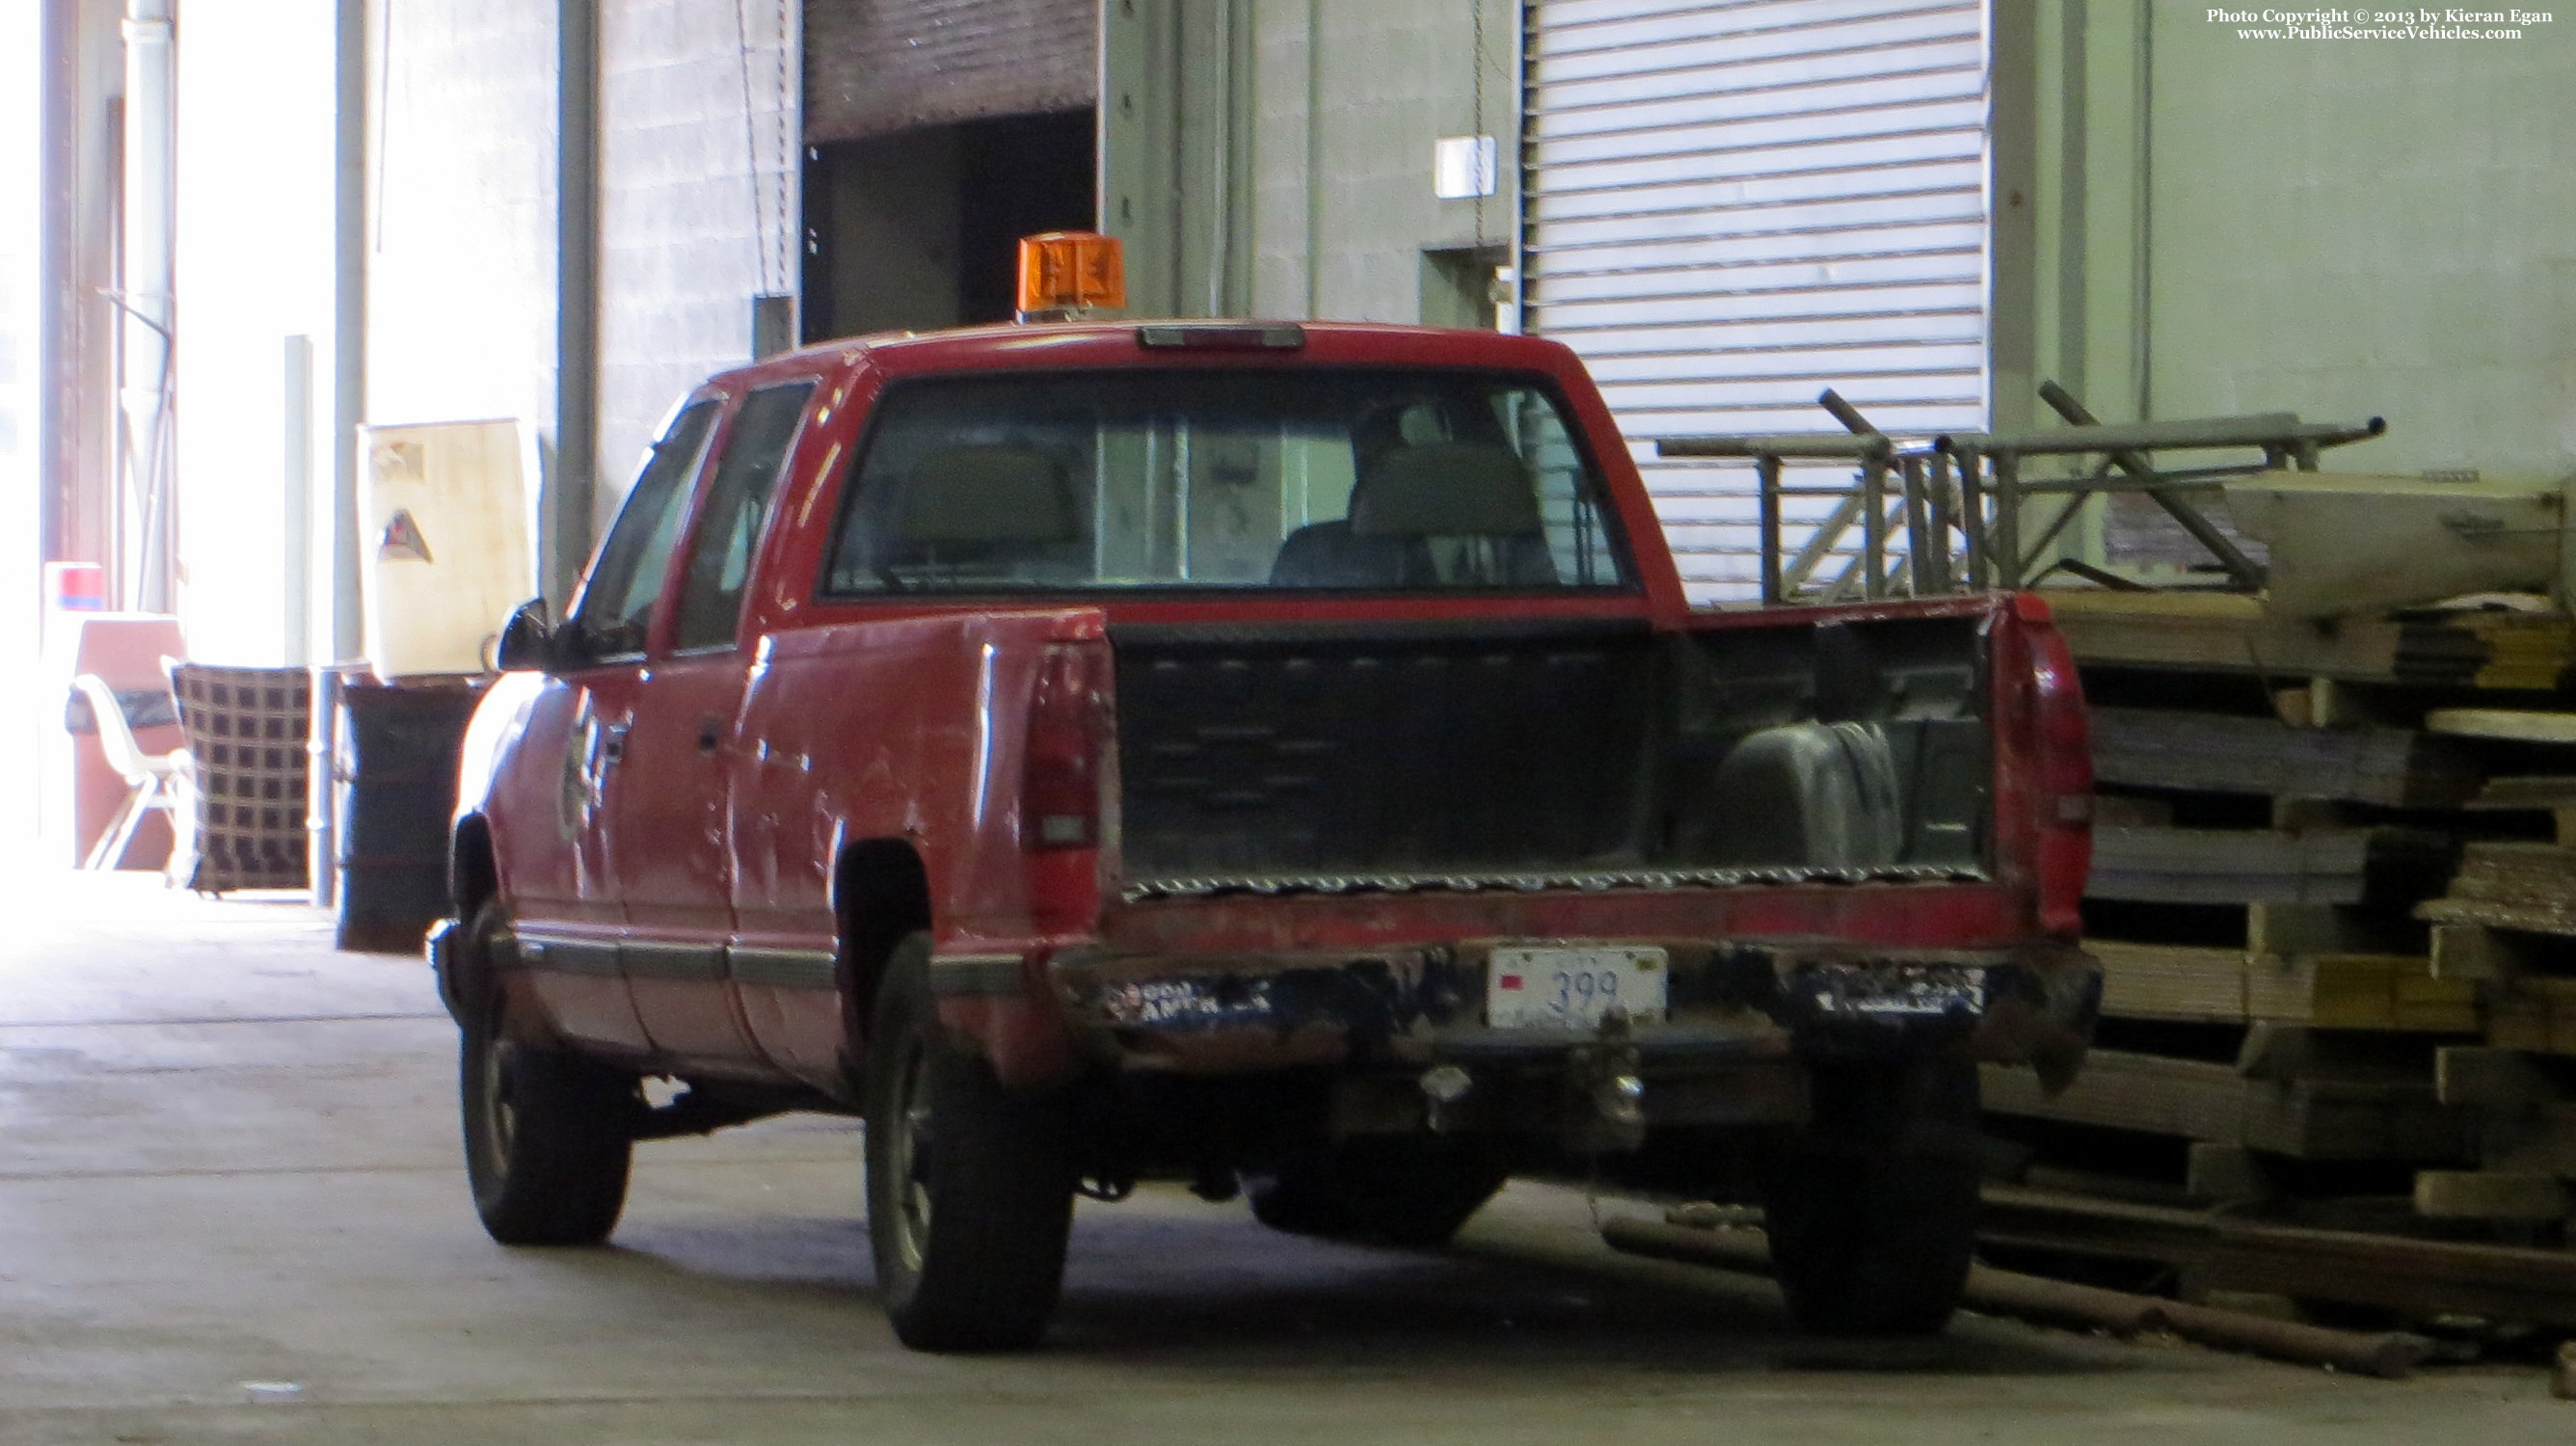 A photo  of Providence Highway Division
            Truck 399, a 1988-1998 Chevrolet 2500 Crew Cab             taken by Kieran Egan